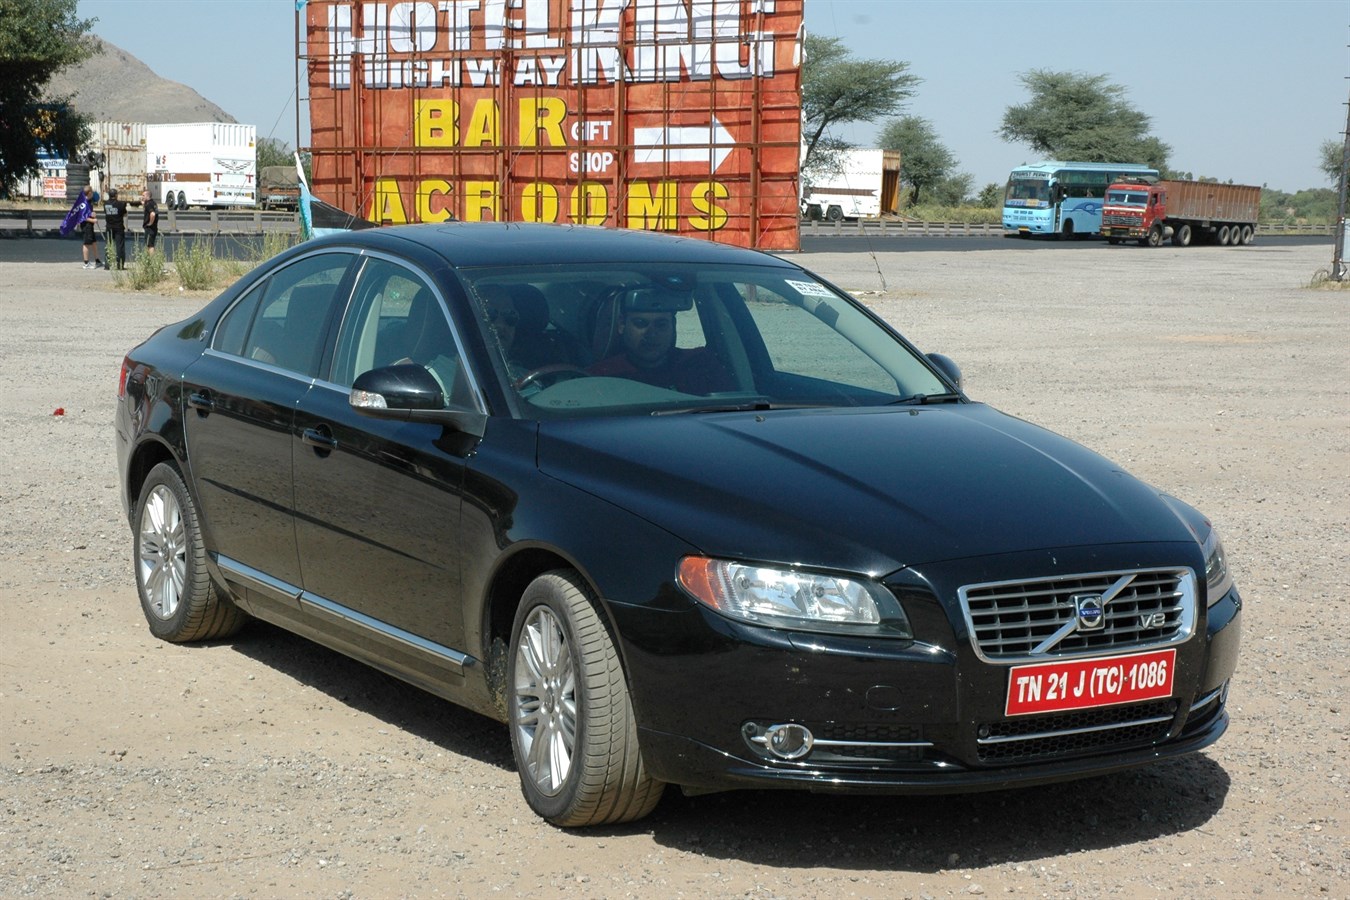 Volvo Cars in India - both Volvo S80 and Volvo XC90 were introduced in 2007